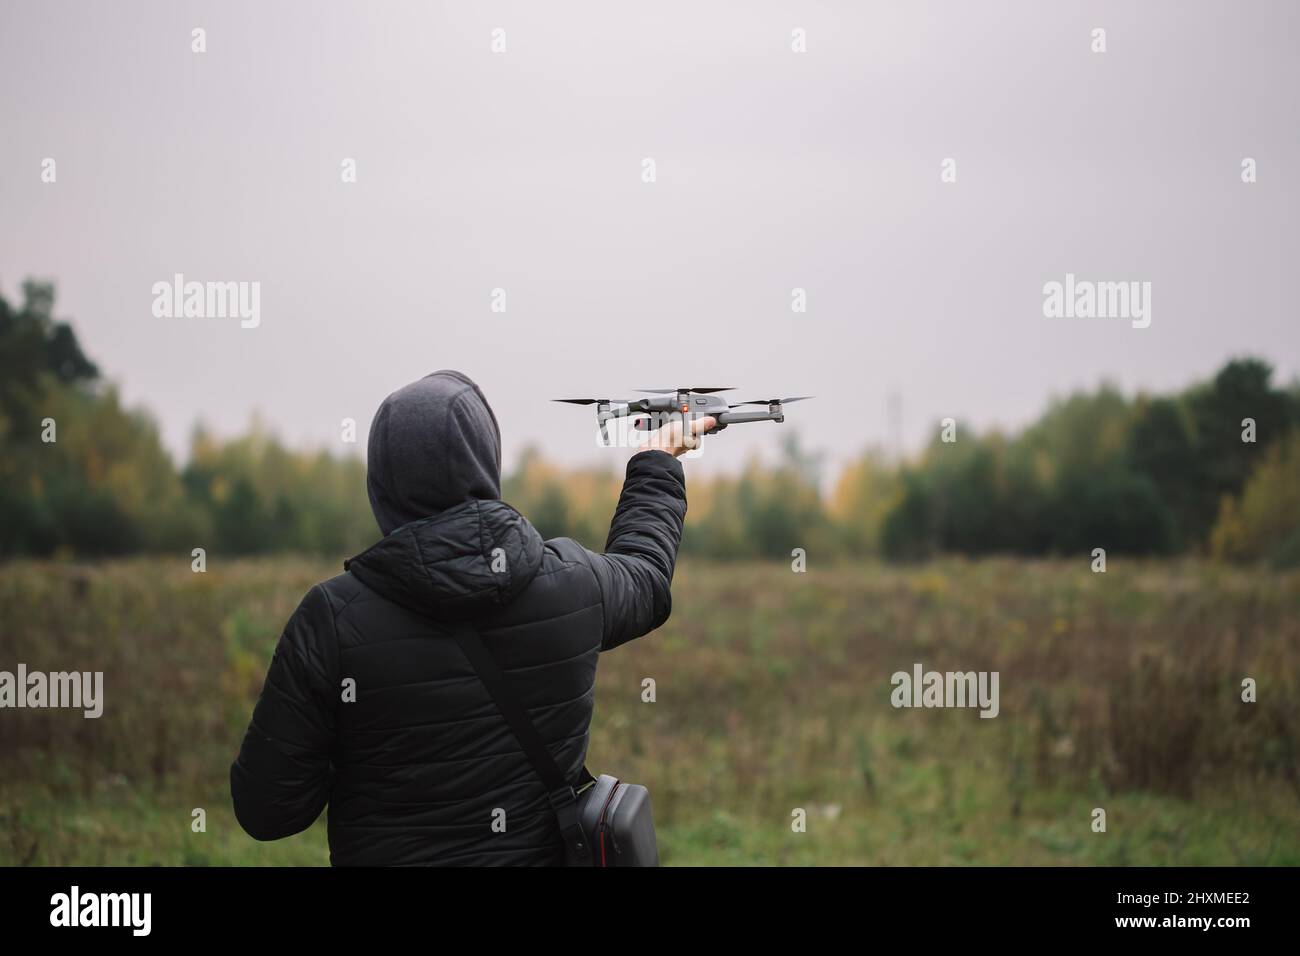 Man holding drone and remote control against field background. Stock Photo